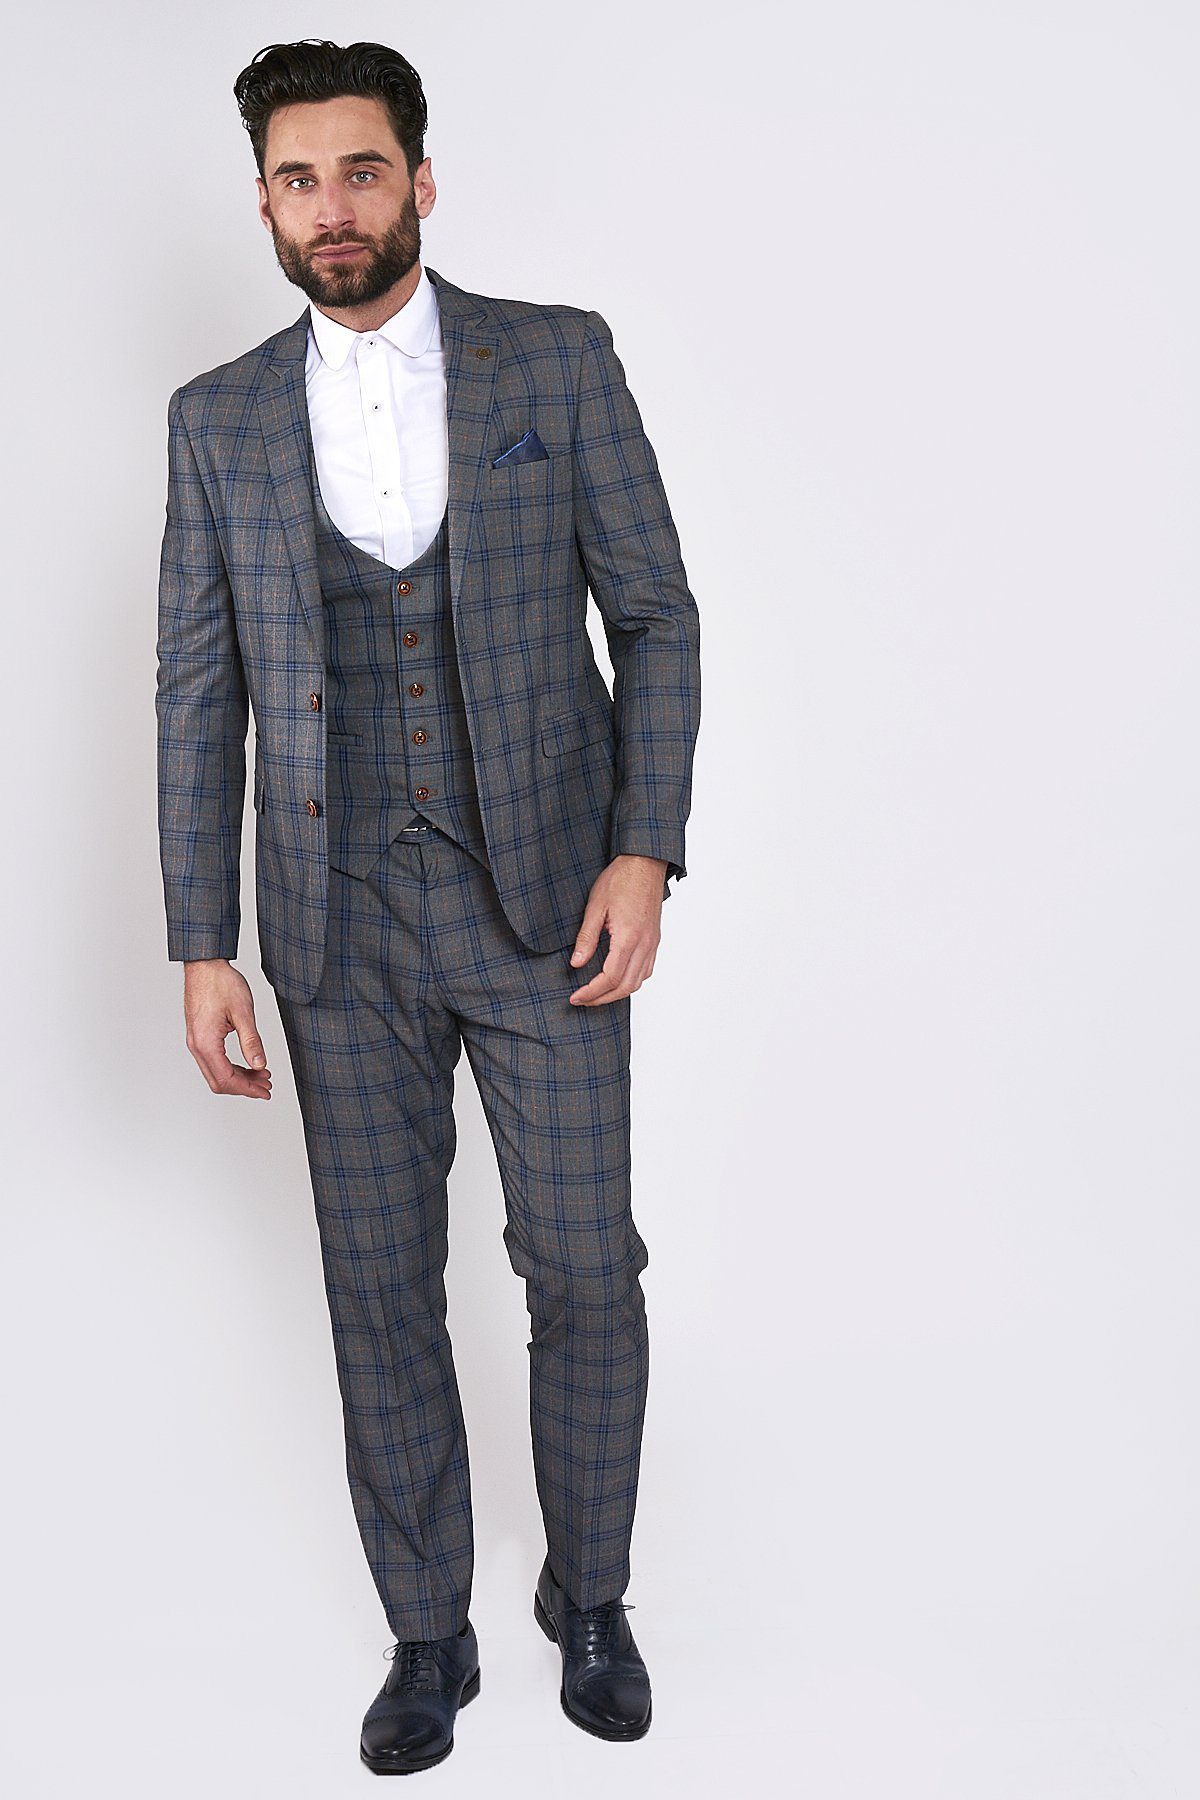 Logan Grey Check Suit with Single Breasted Waistcoat | Suits ...